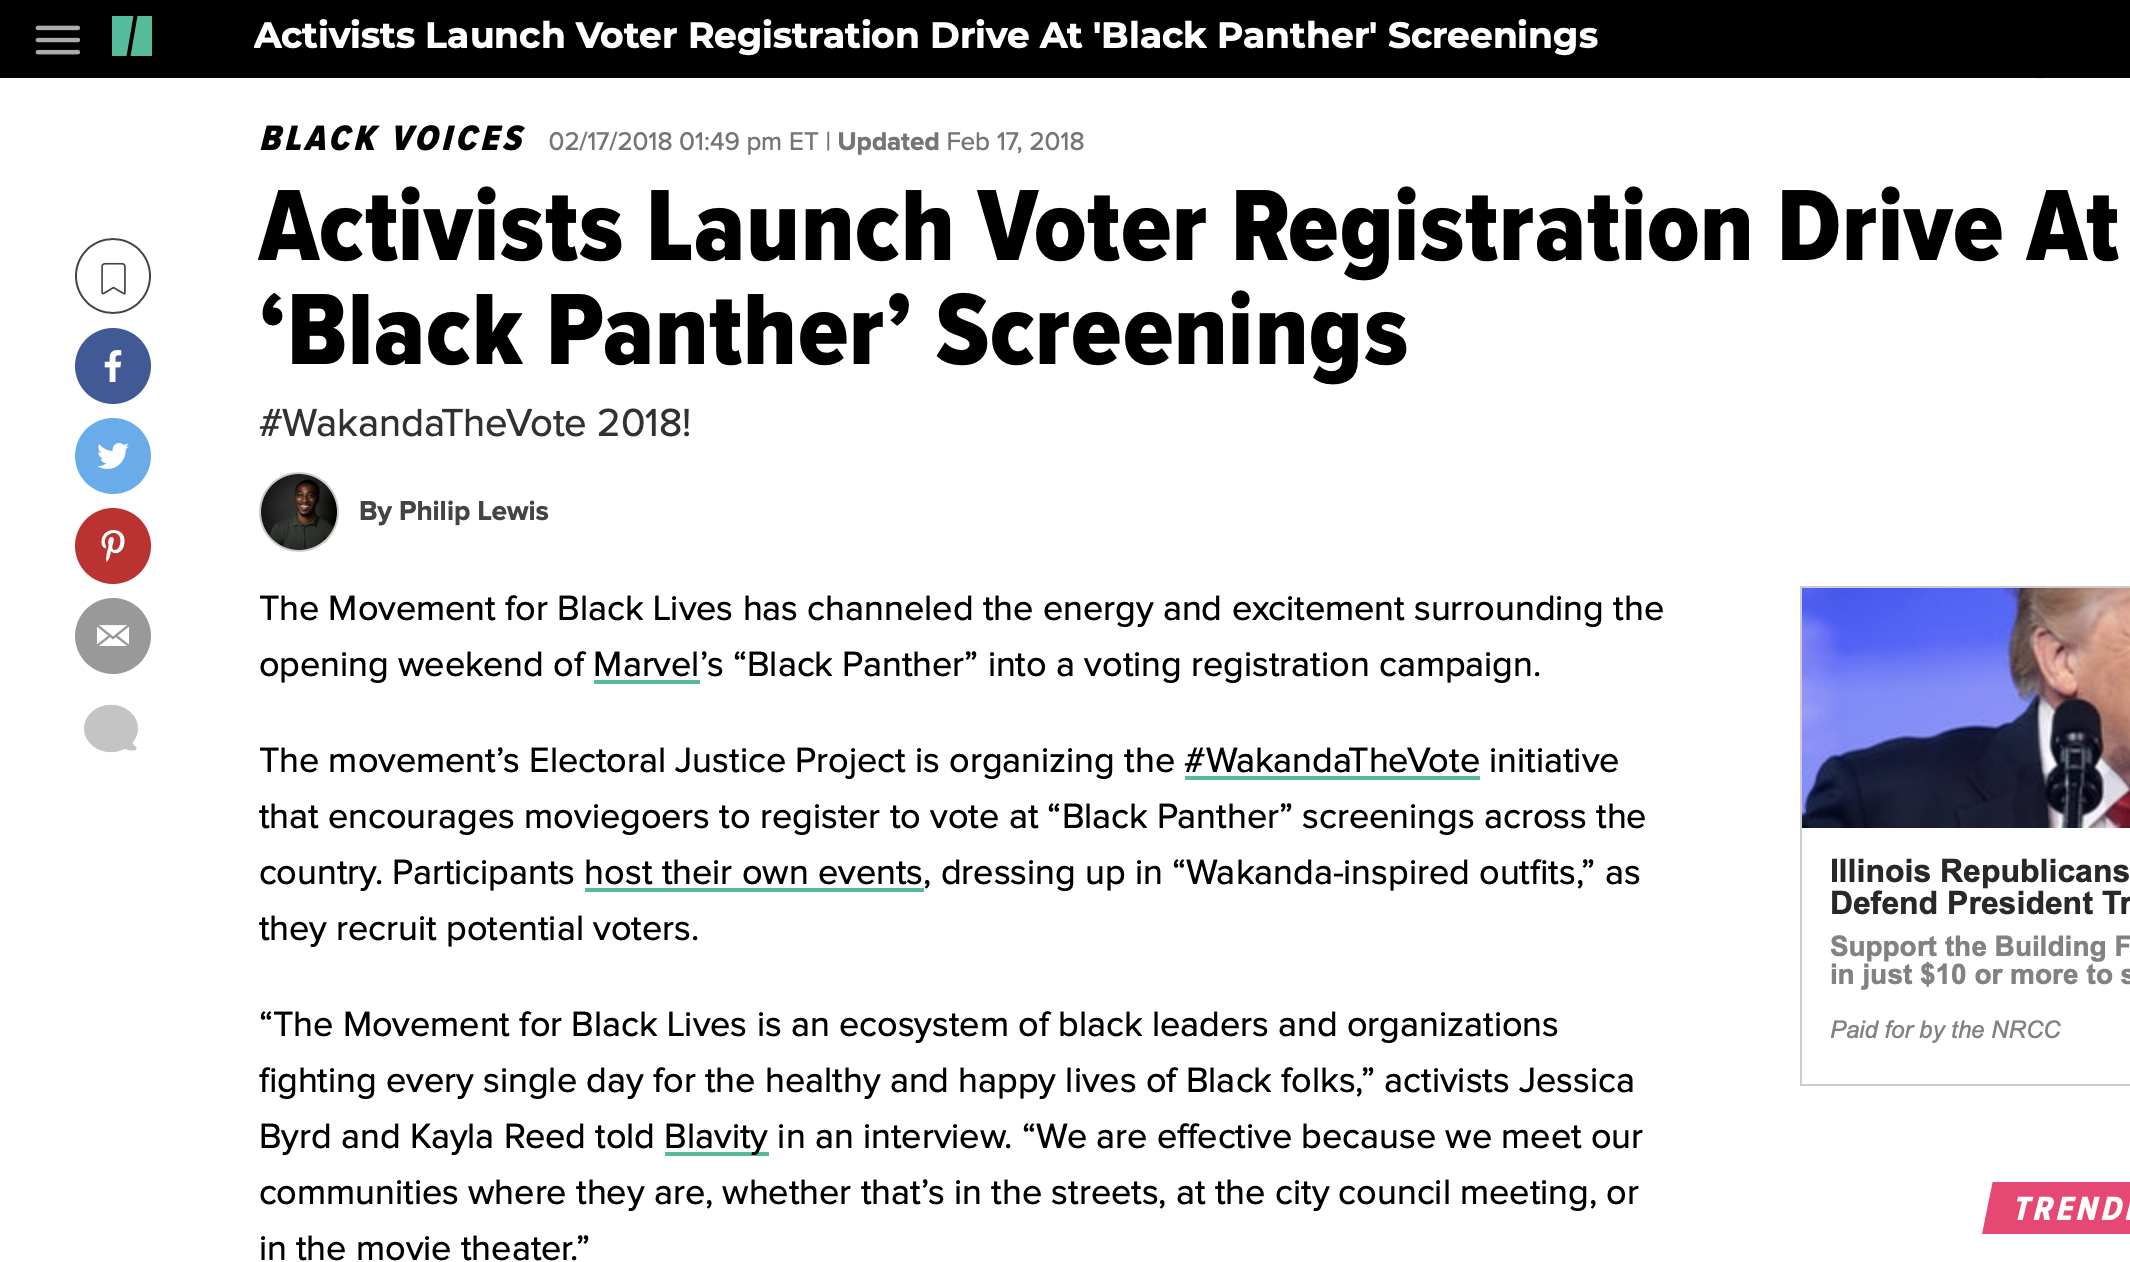 Activists Launch Voter Registration Drive At ‘Black Panther’ Screenings